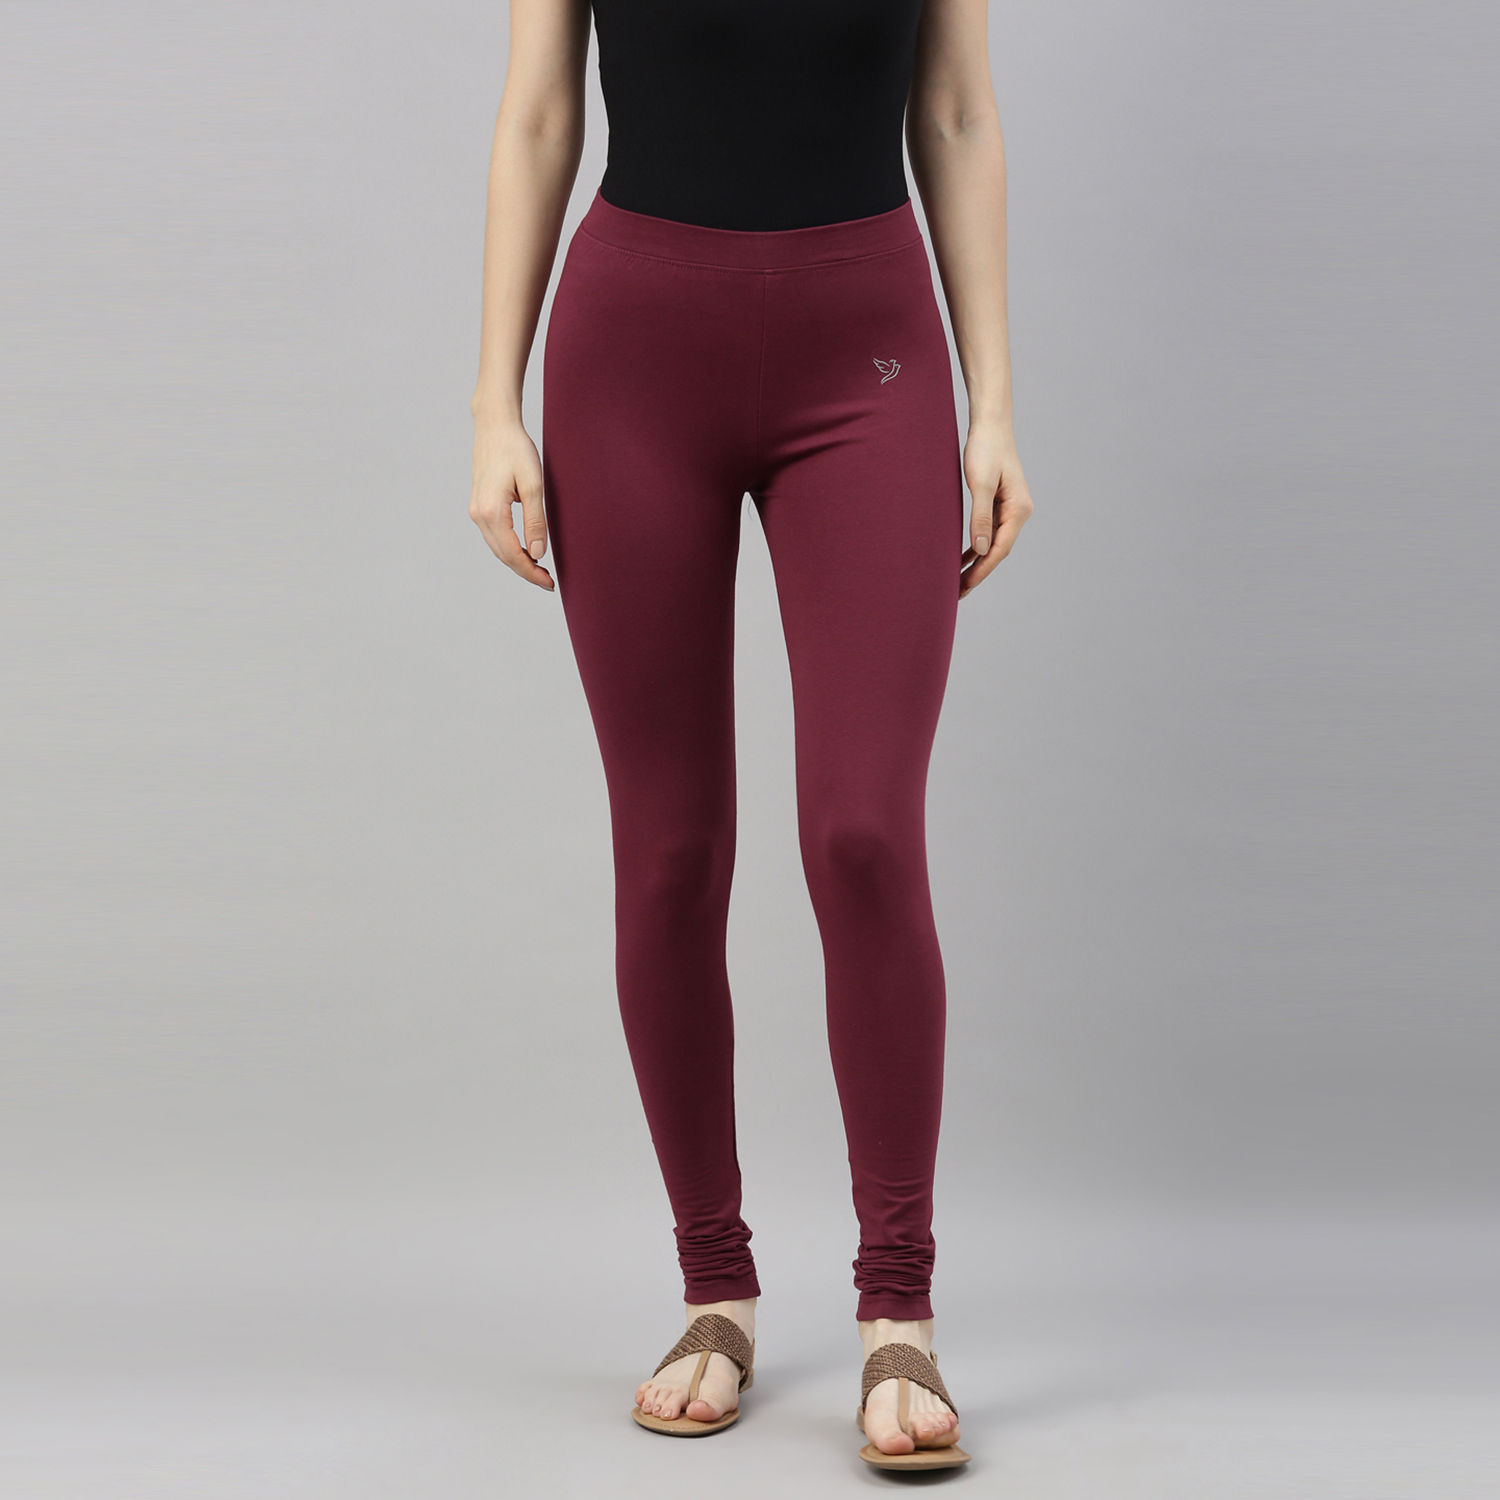 Straight Fit And Churidar Cotton And Hosiery Twin Birds - Long & Lean  Leggings, Size: Large And Free Size at Rs 469 in Gorakhpur